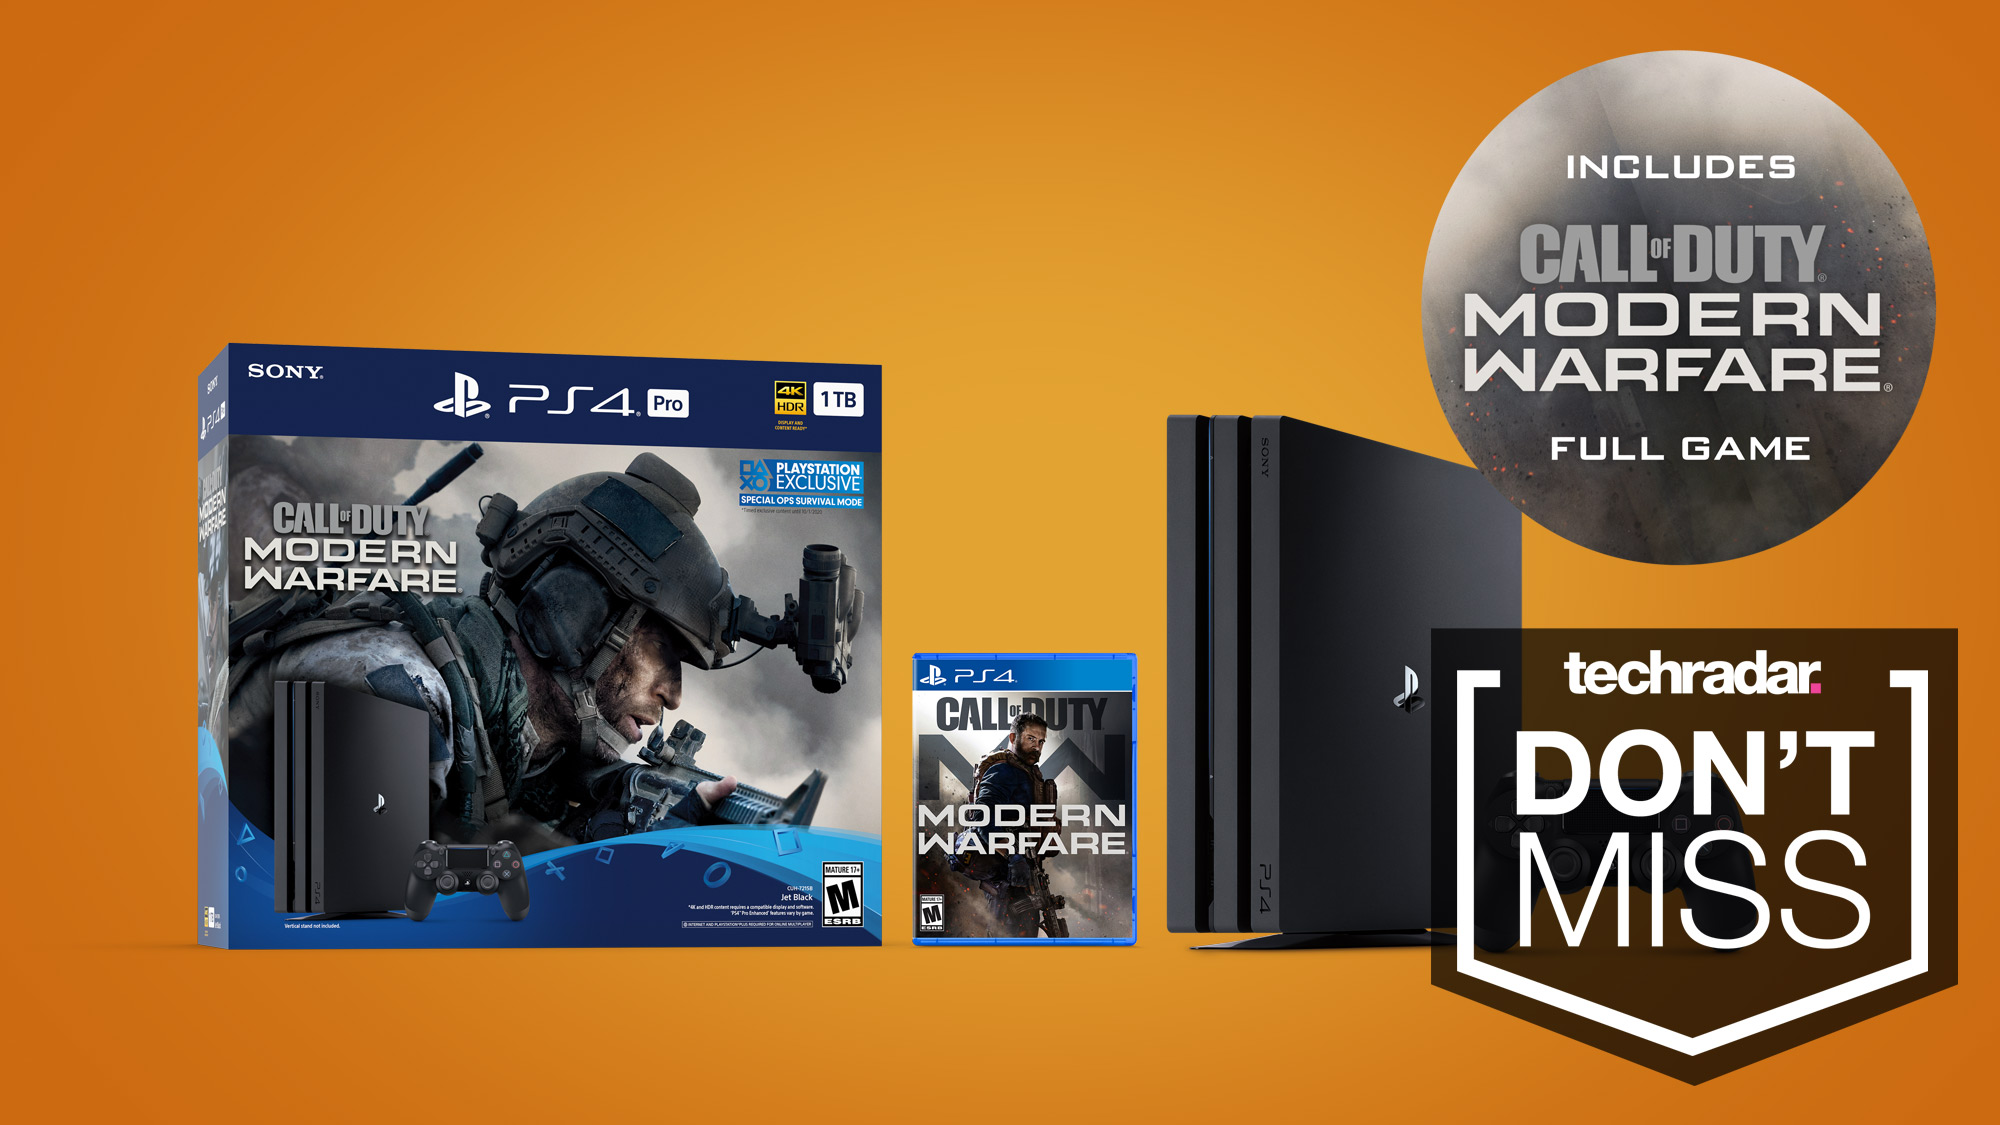 This PS4 Pro deal Call of Duty: Modern Warfare $299 |